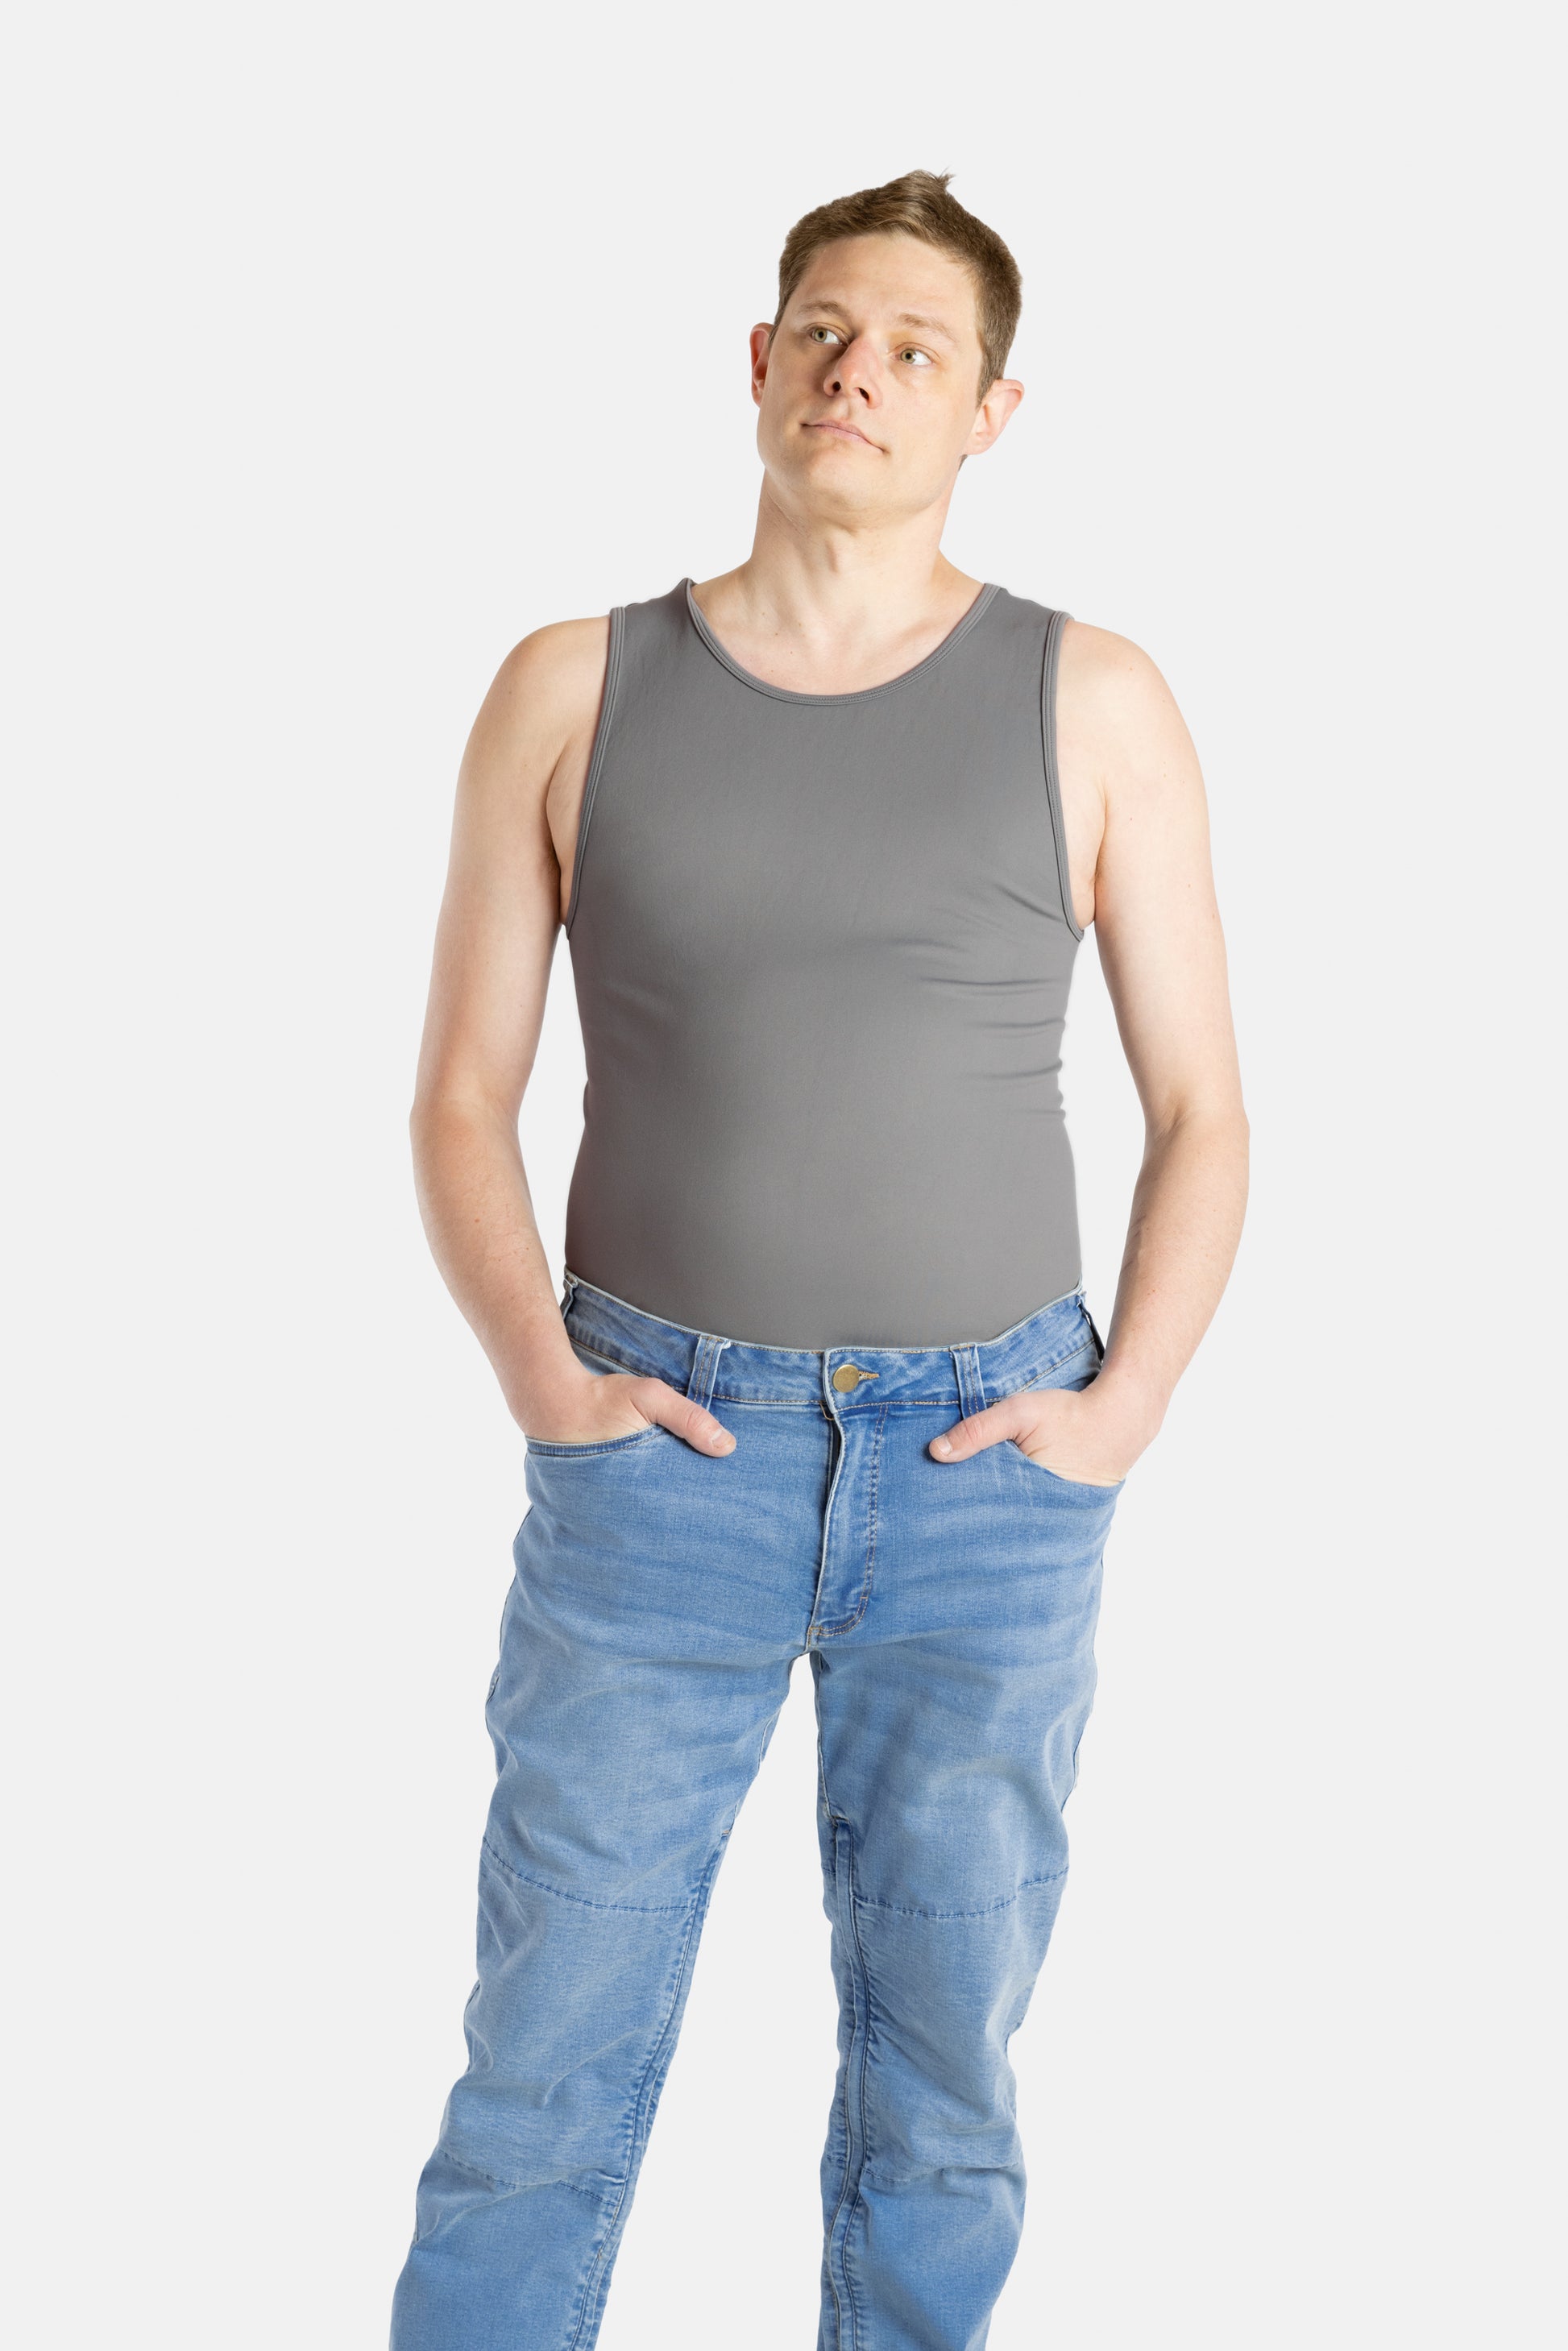 A white man with short brown hair wears a charcoal-gray tank top and denim jeans.